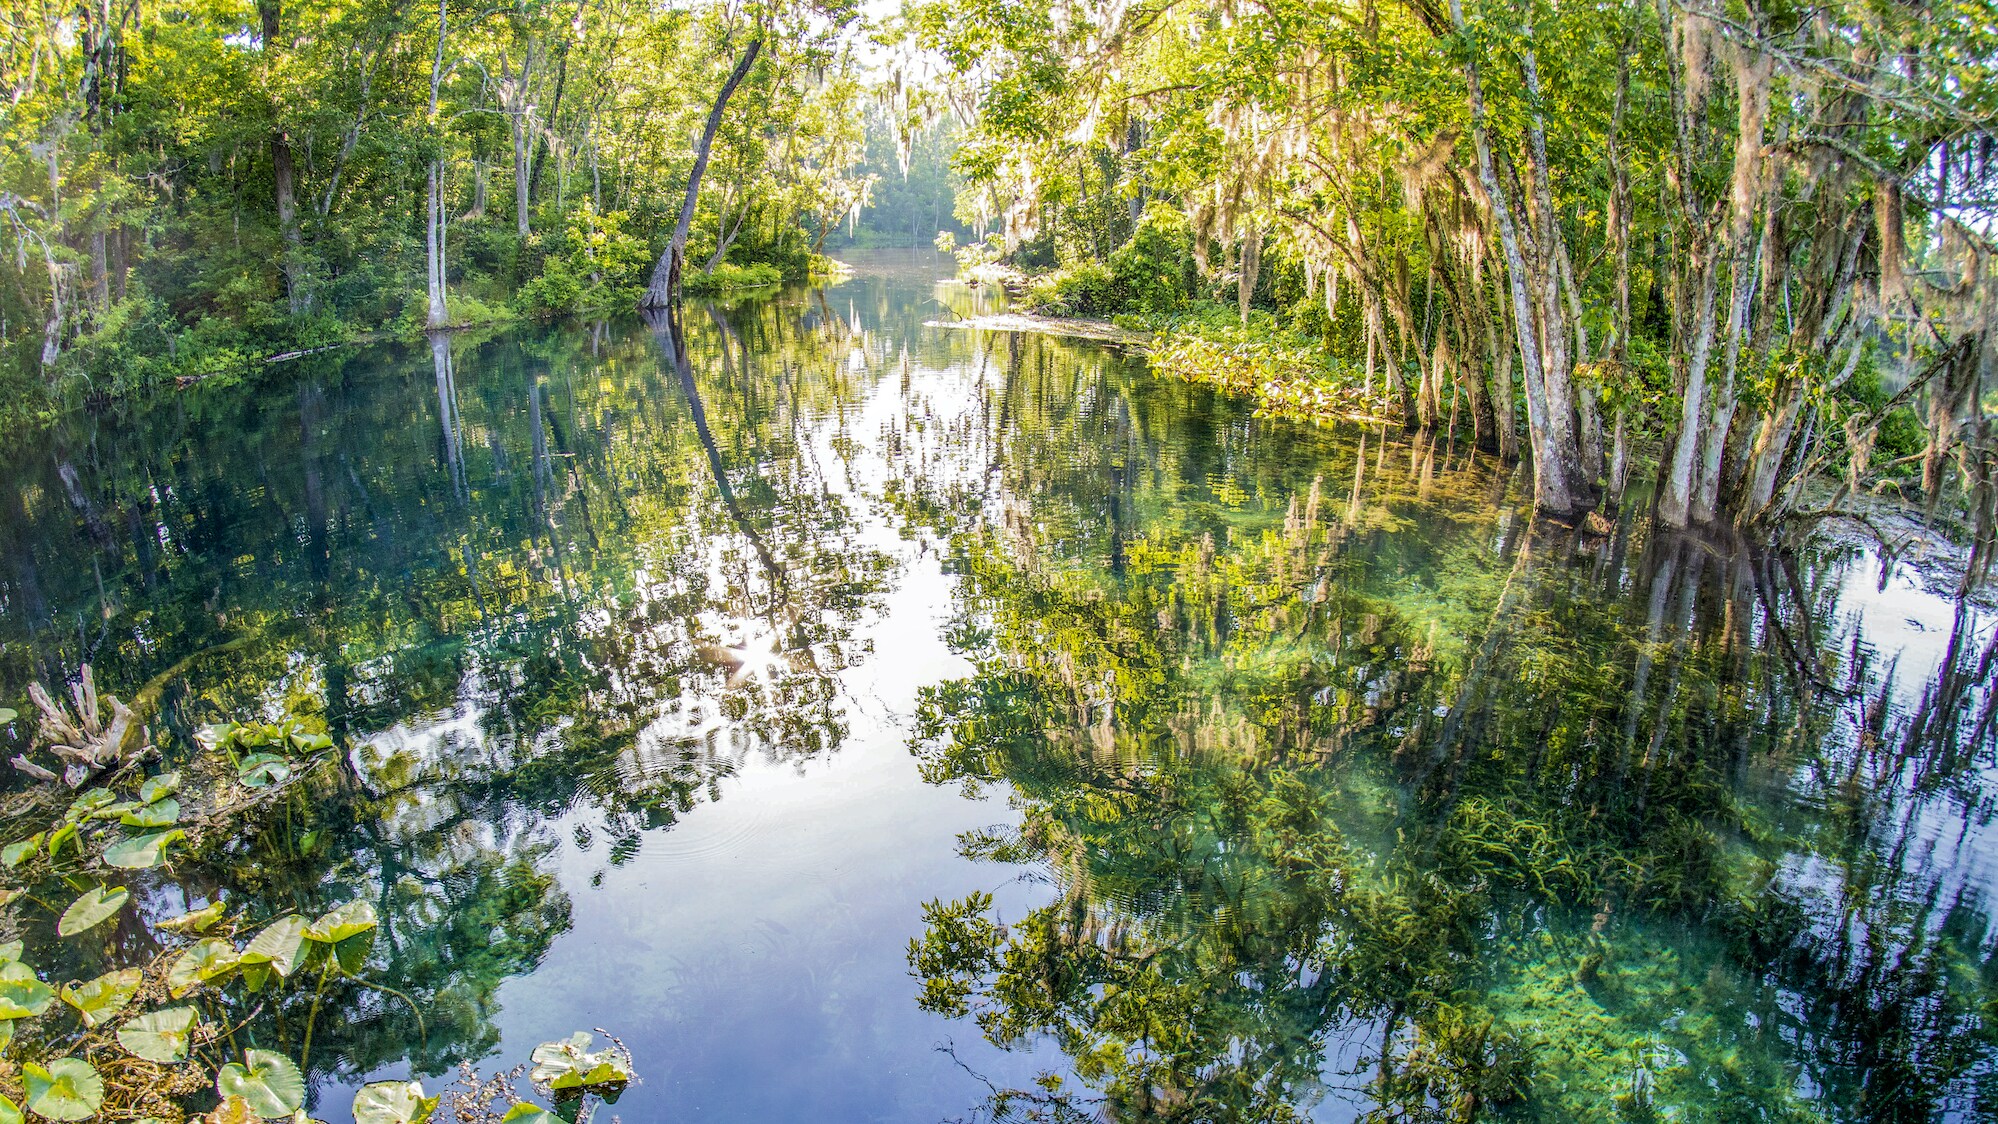 Silver Springs, Florida sets the scene for the manatee's journey. (National Geographic for Disney+/Mark Emery)